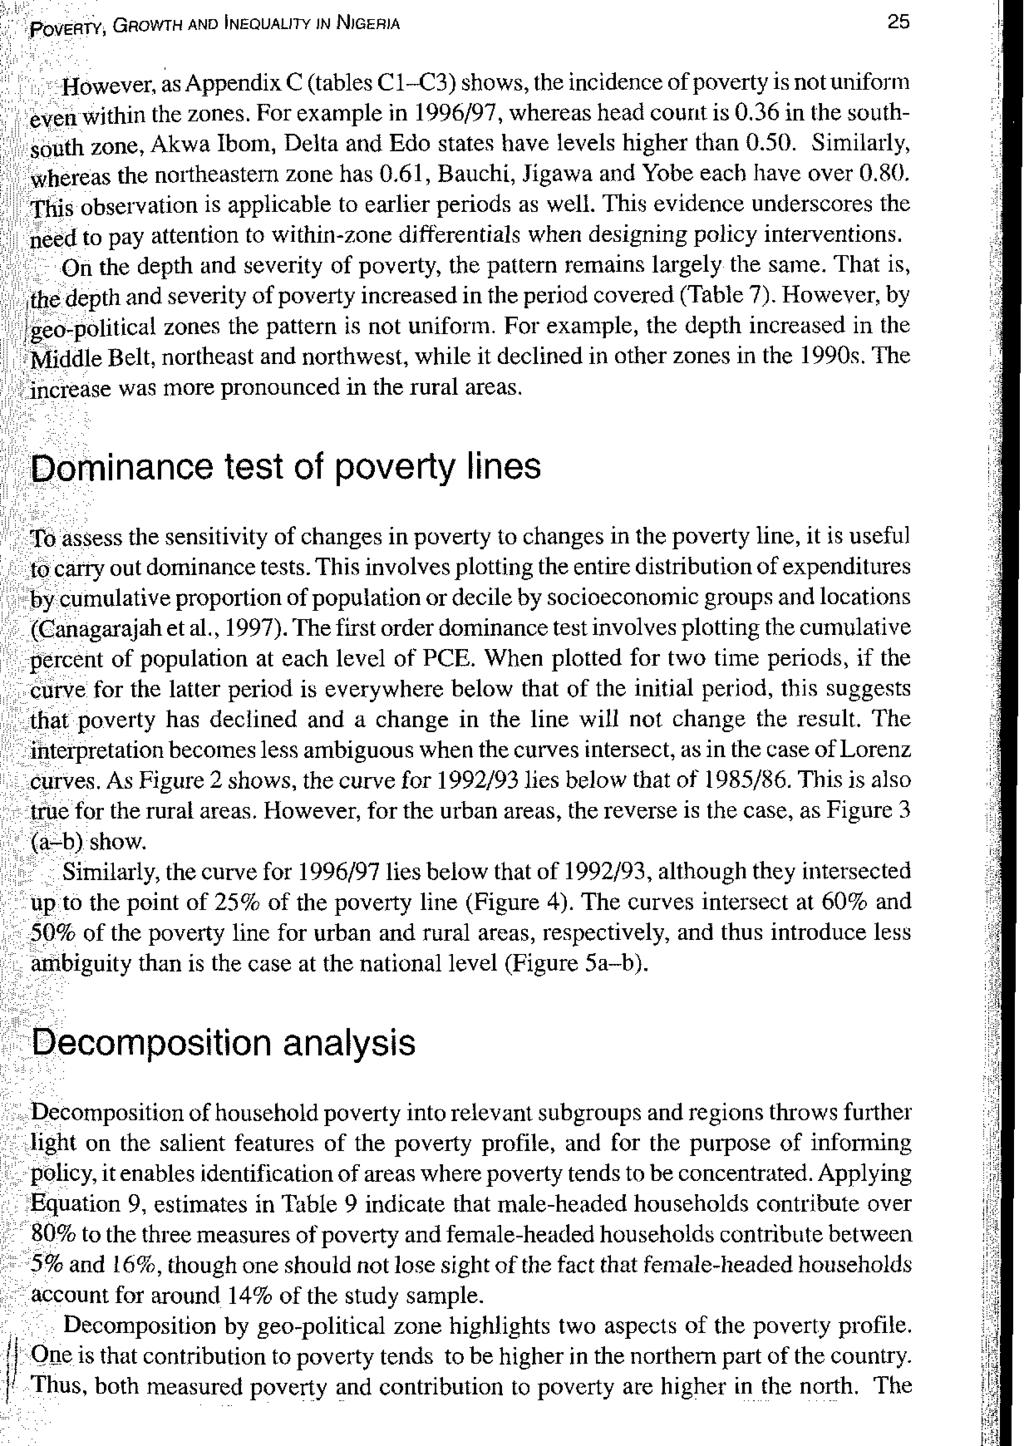 POVERTY, GROWTH AND INEQUALITY IN NIGERIA 25 However, as Appendix C (tables C1-C3) shows, the incidence of poverty is not uniform even within the zones.